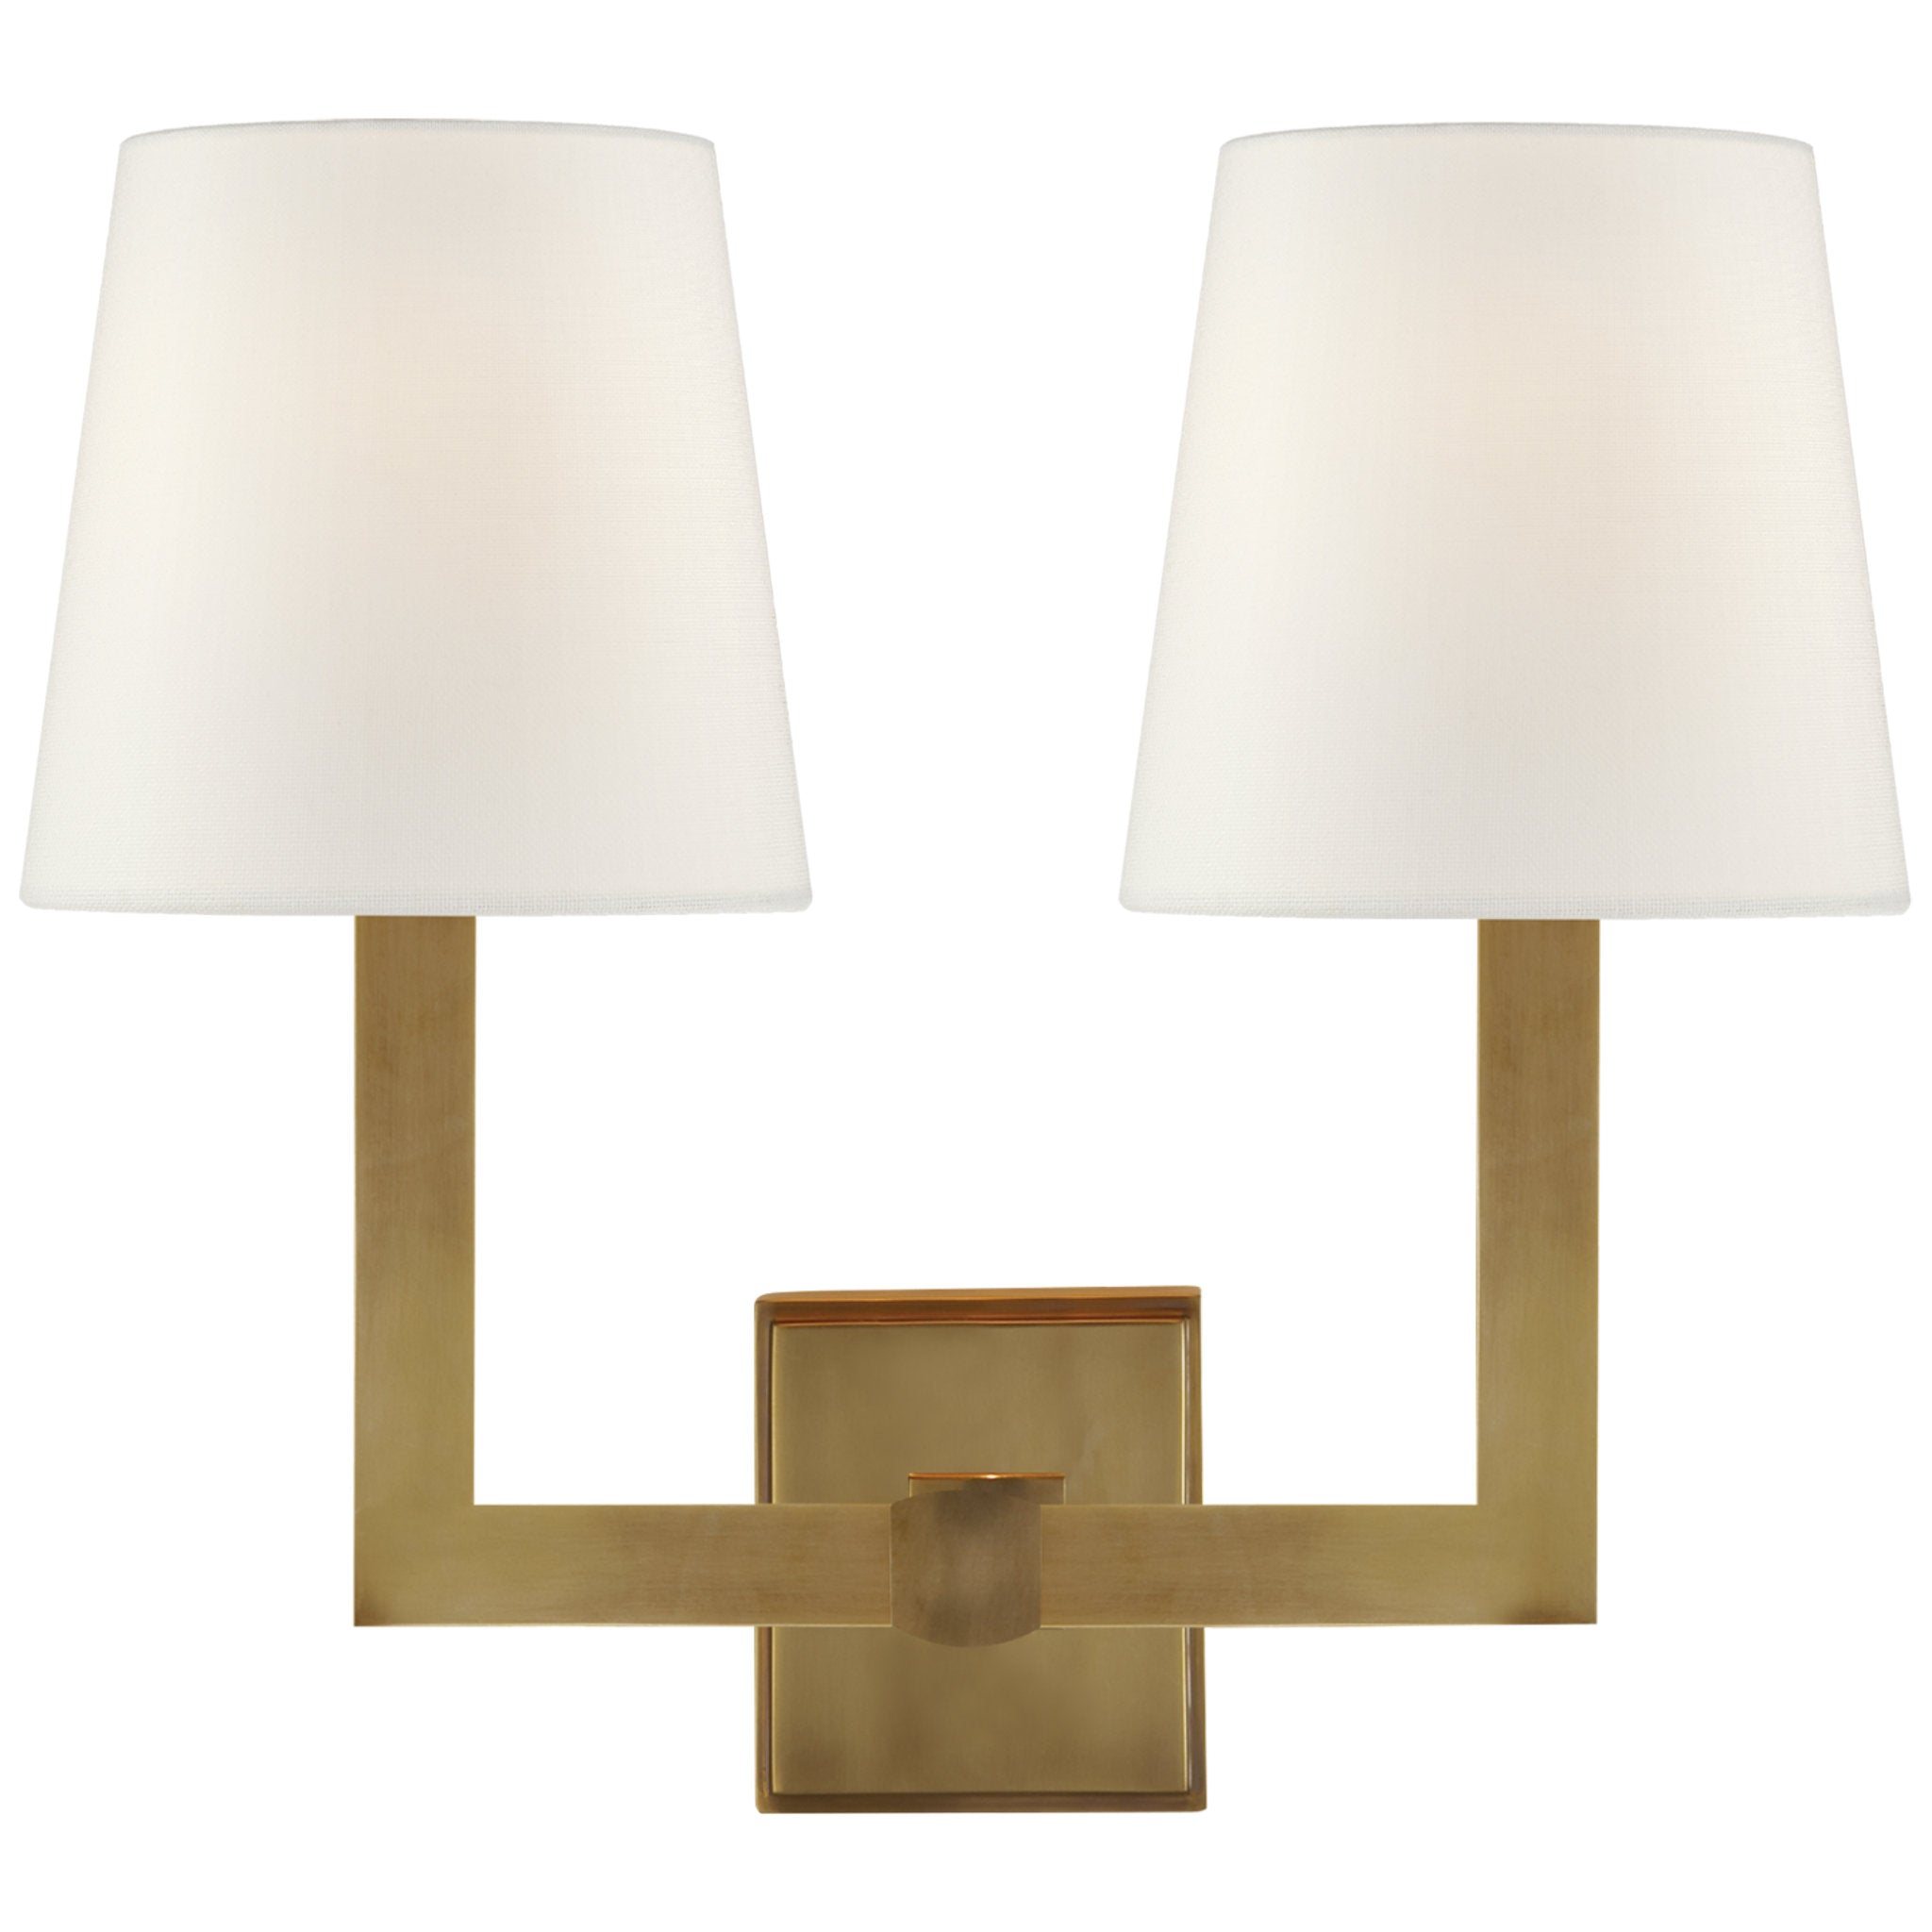 Chapman & Myers Square Tube Double Sconce in Hand-Rubbed Antique Brass with Linen Shades